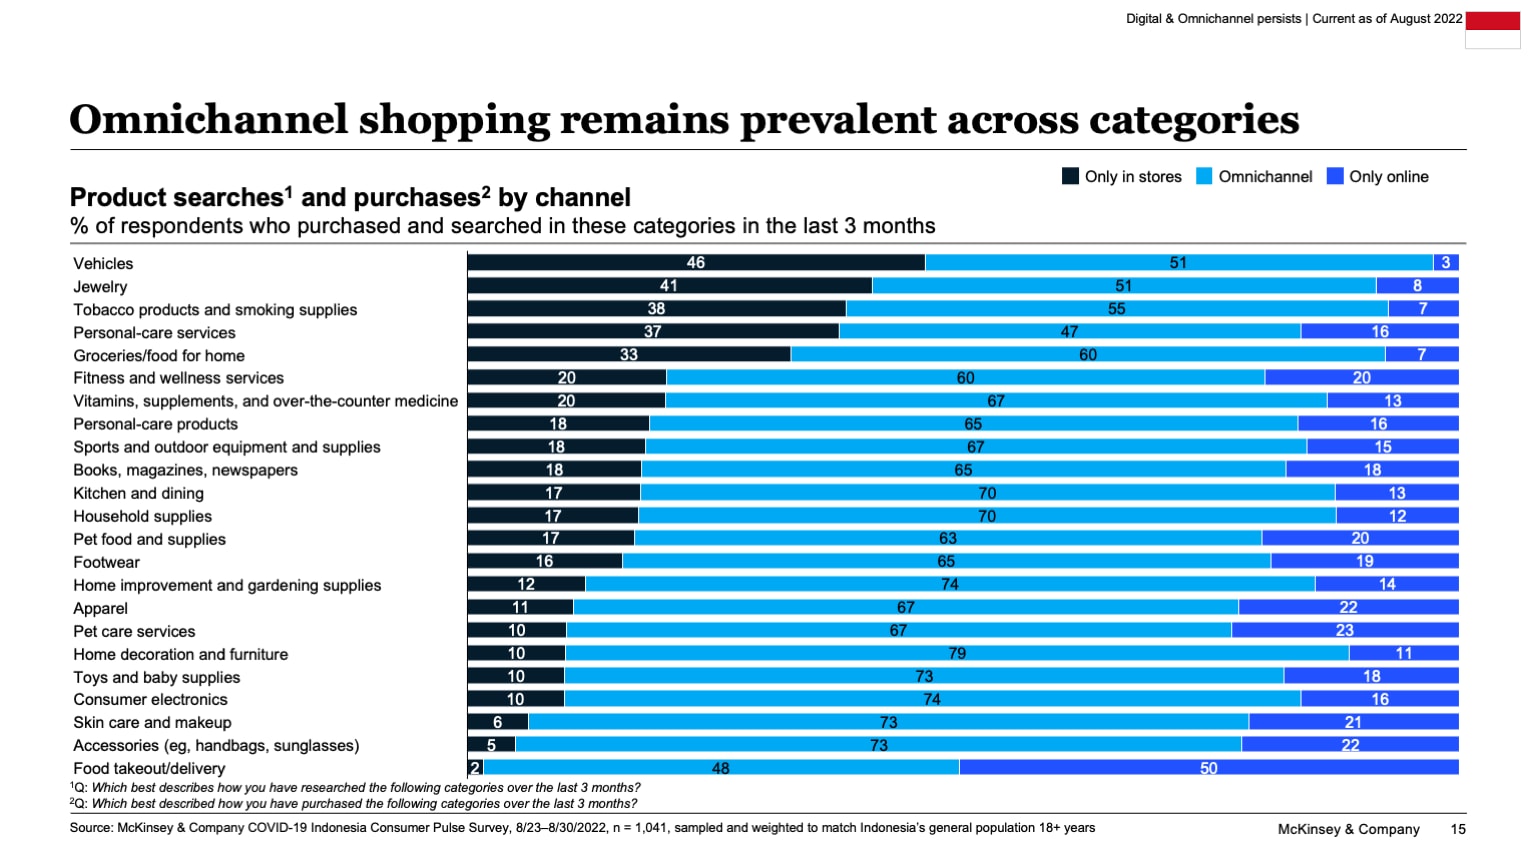 Omnichannel shopping remains prevalent across categories